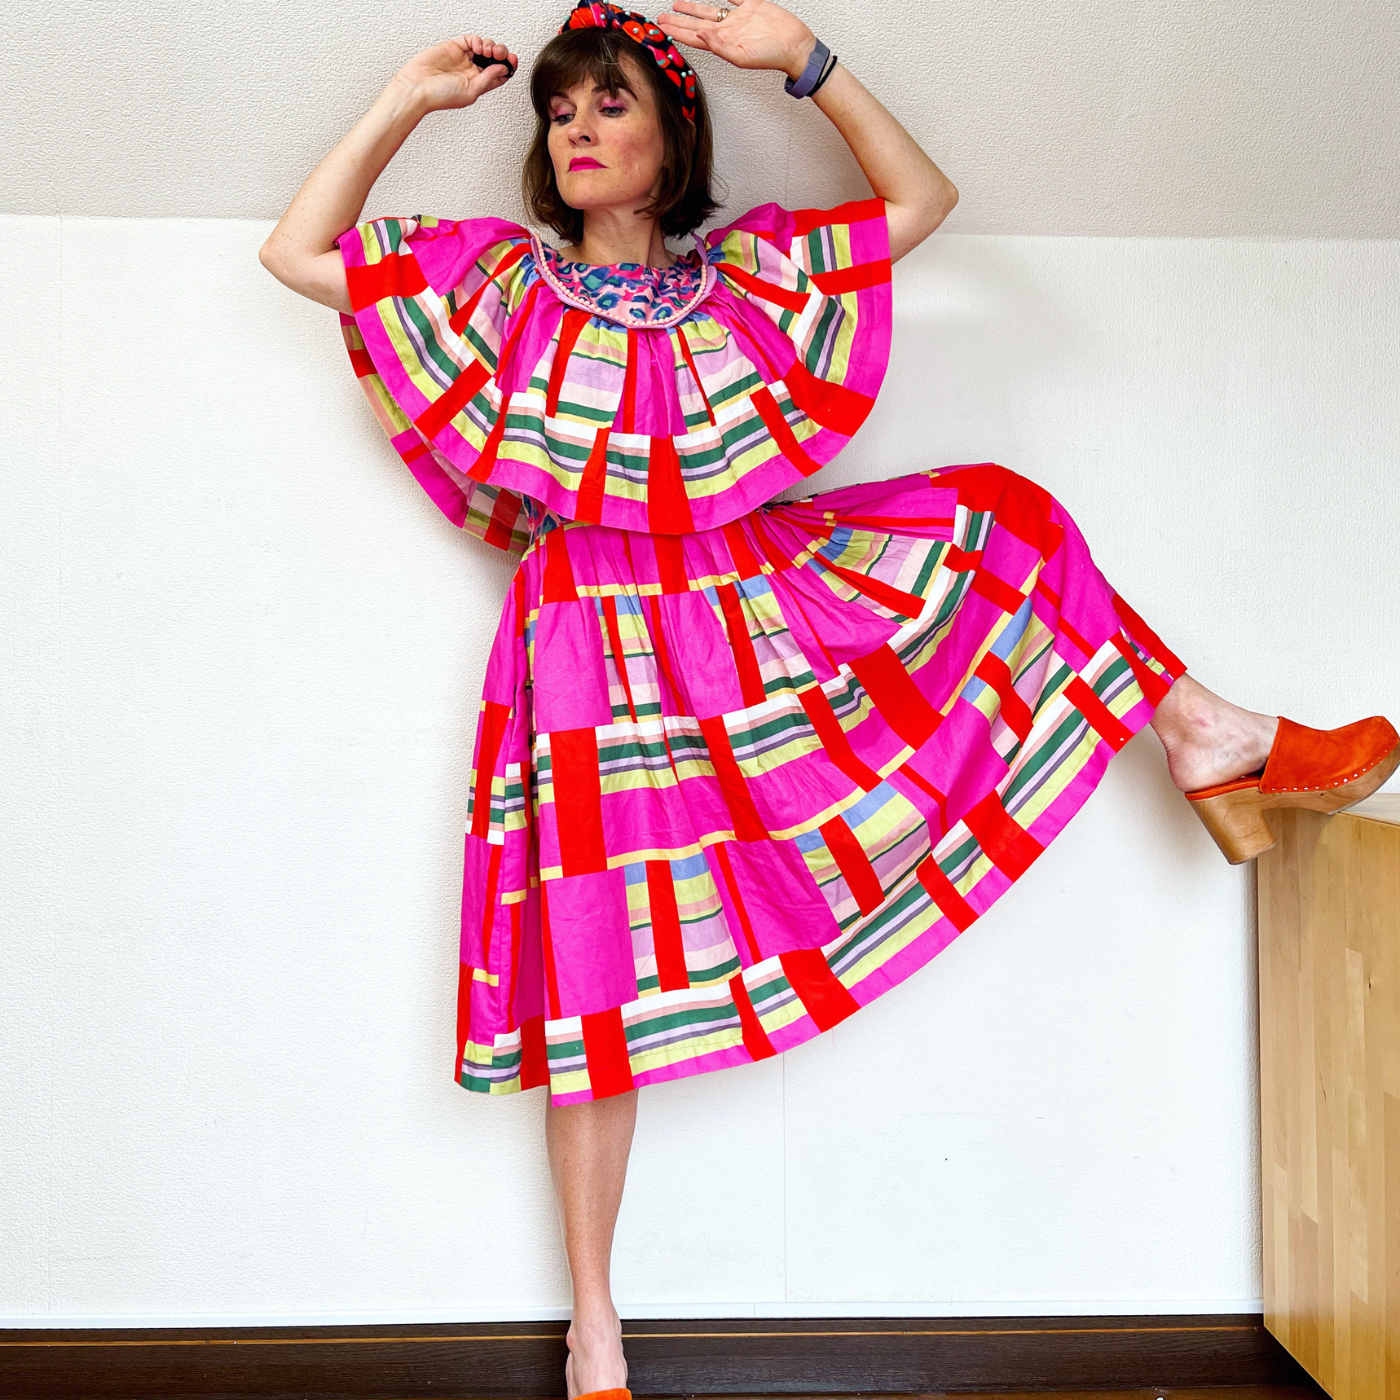 Katie Kortman stands with both hands reaching above her head and her right leg up on a piece of wooden furniture. The dress is knee length and the top has a large section of drapey fabric that looks almost like a cape. The pattern has rows of hot pink and red vertical blocks interspersed by horizontal stripes in pink, blue, white, yellow and green.